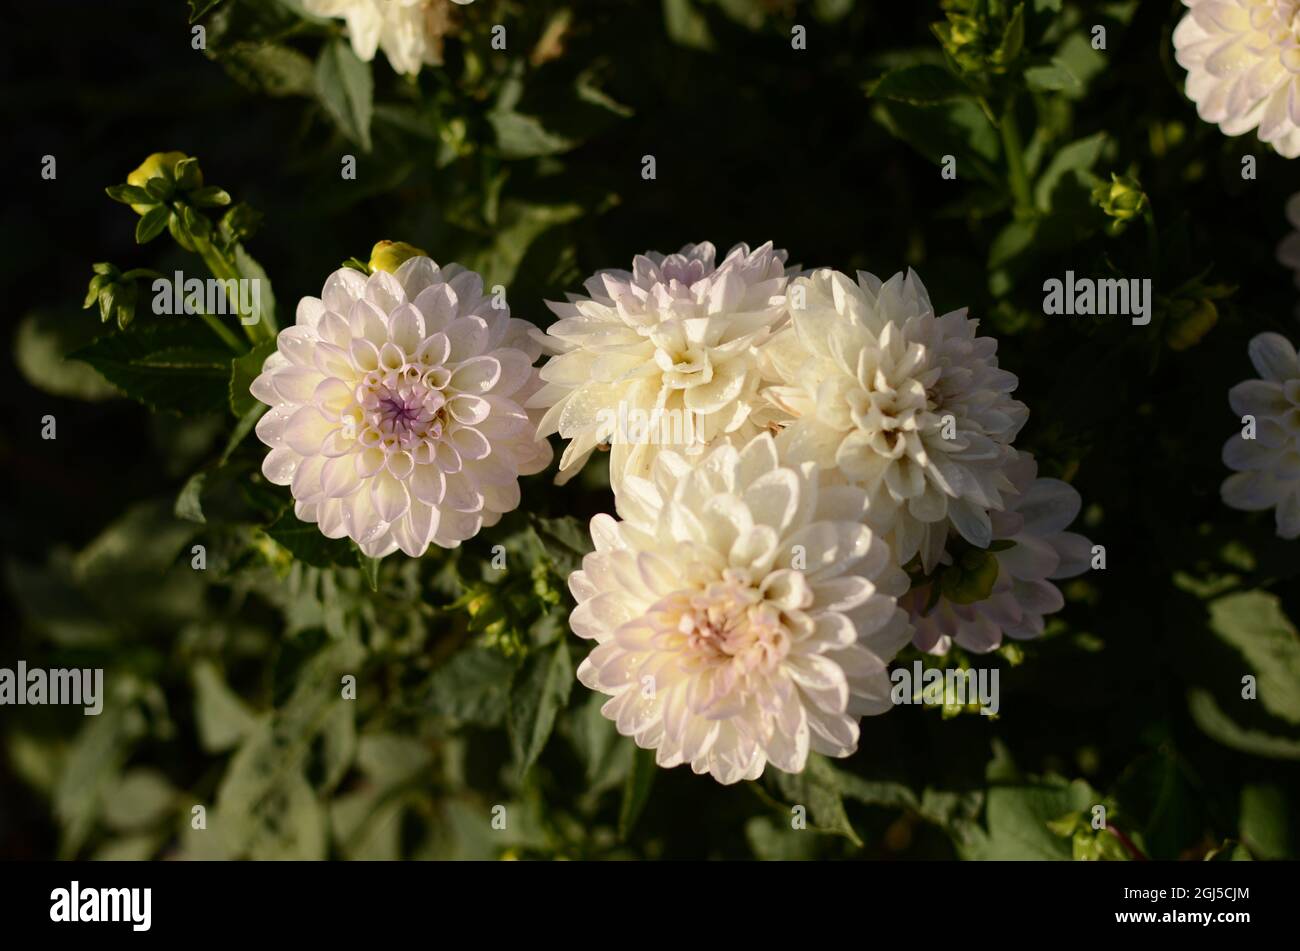 White And Pink 'Eveline' Dahlia Flowers. Stock Photo